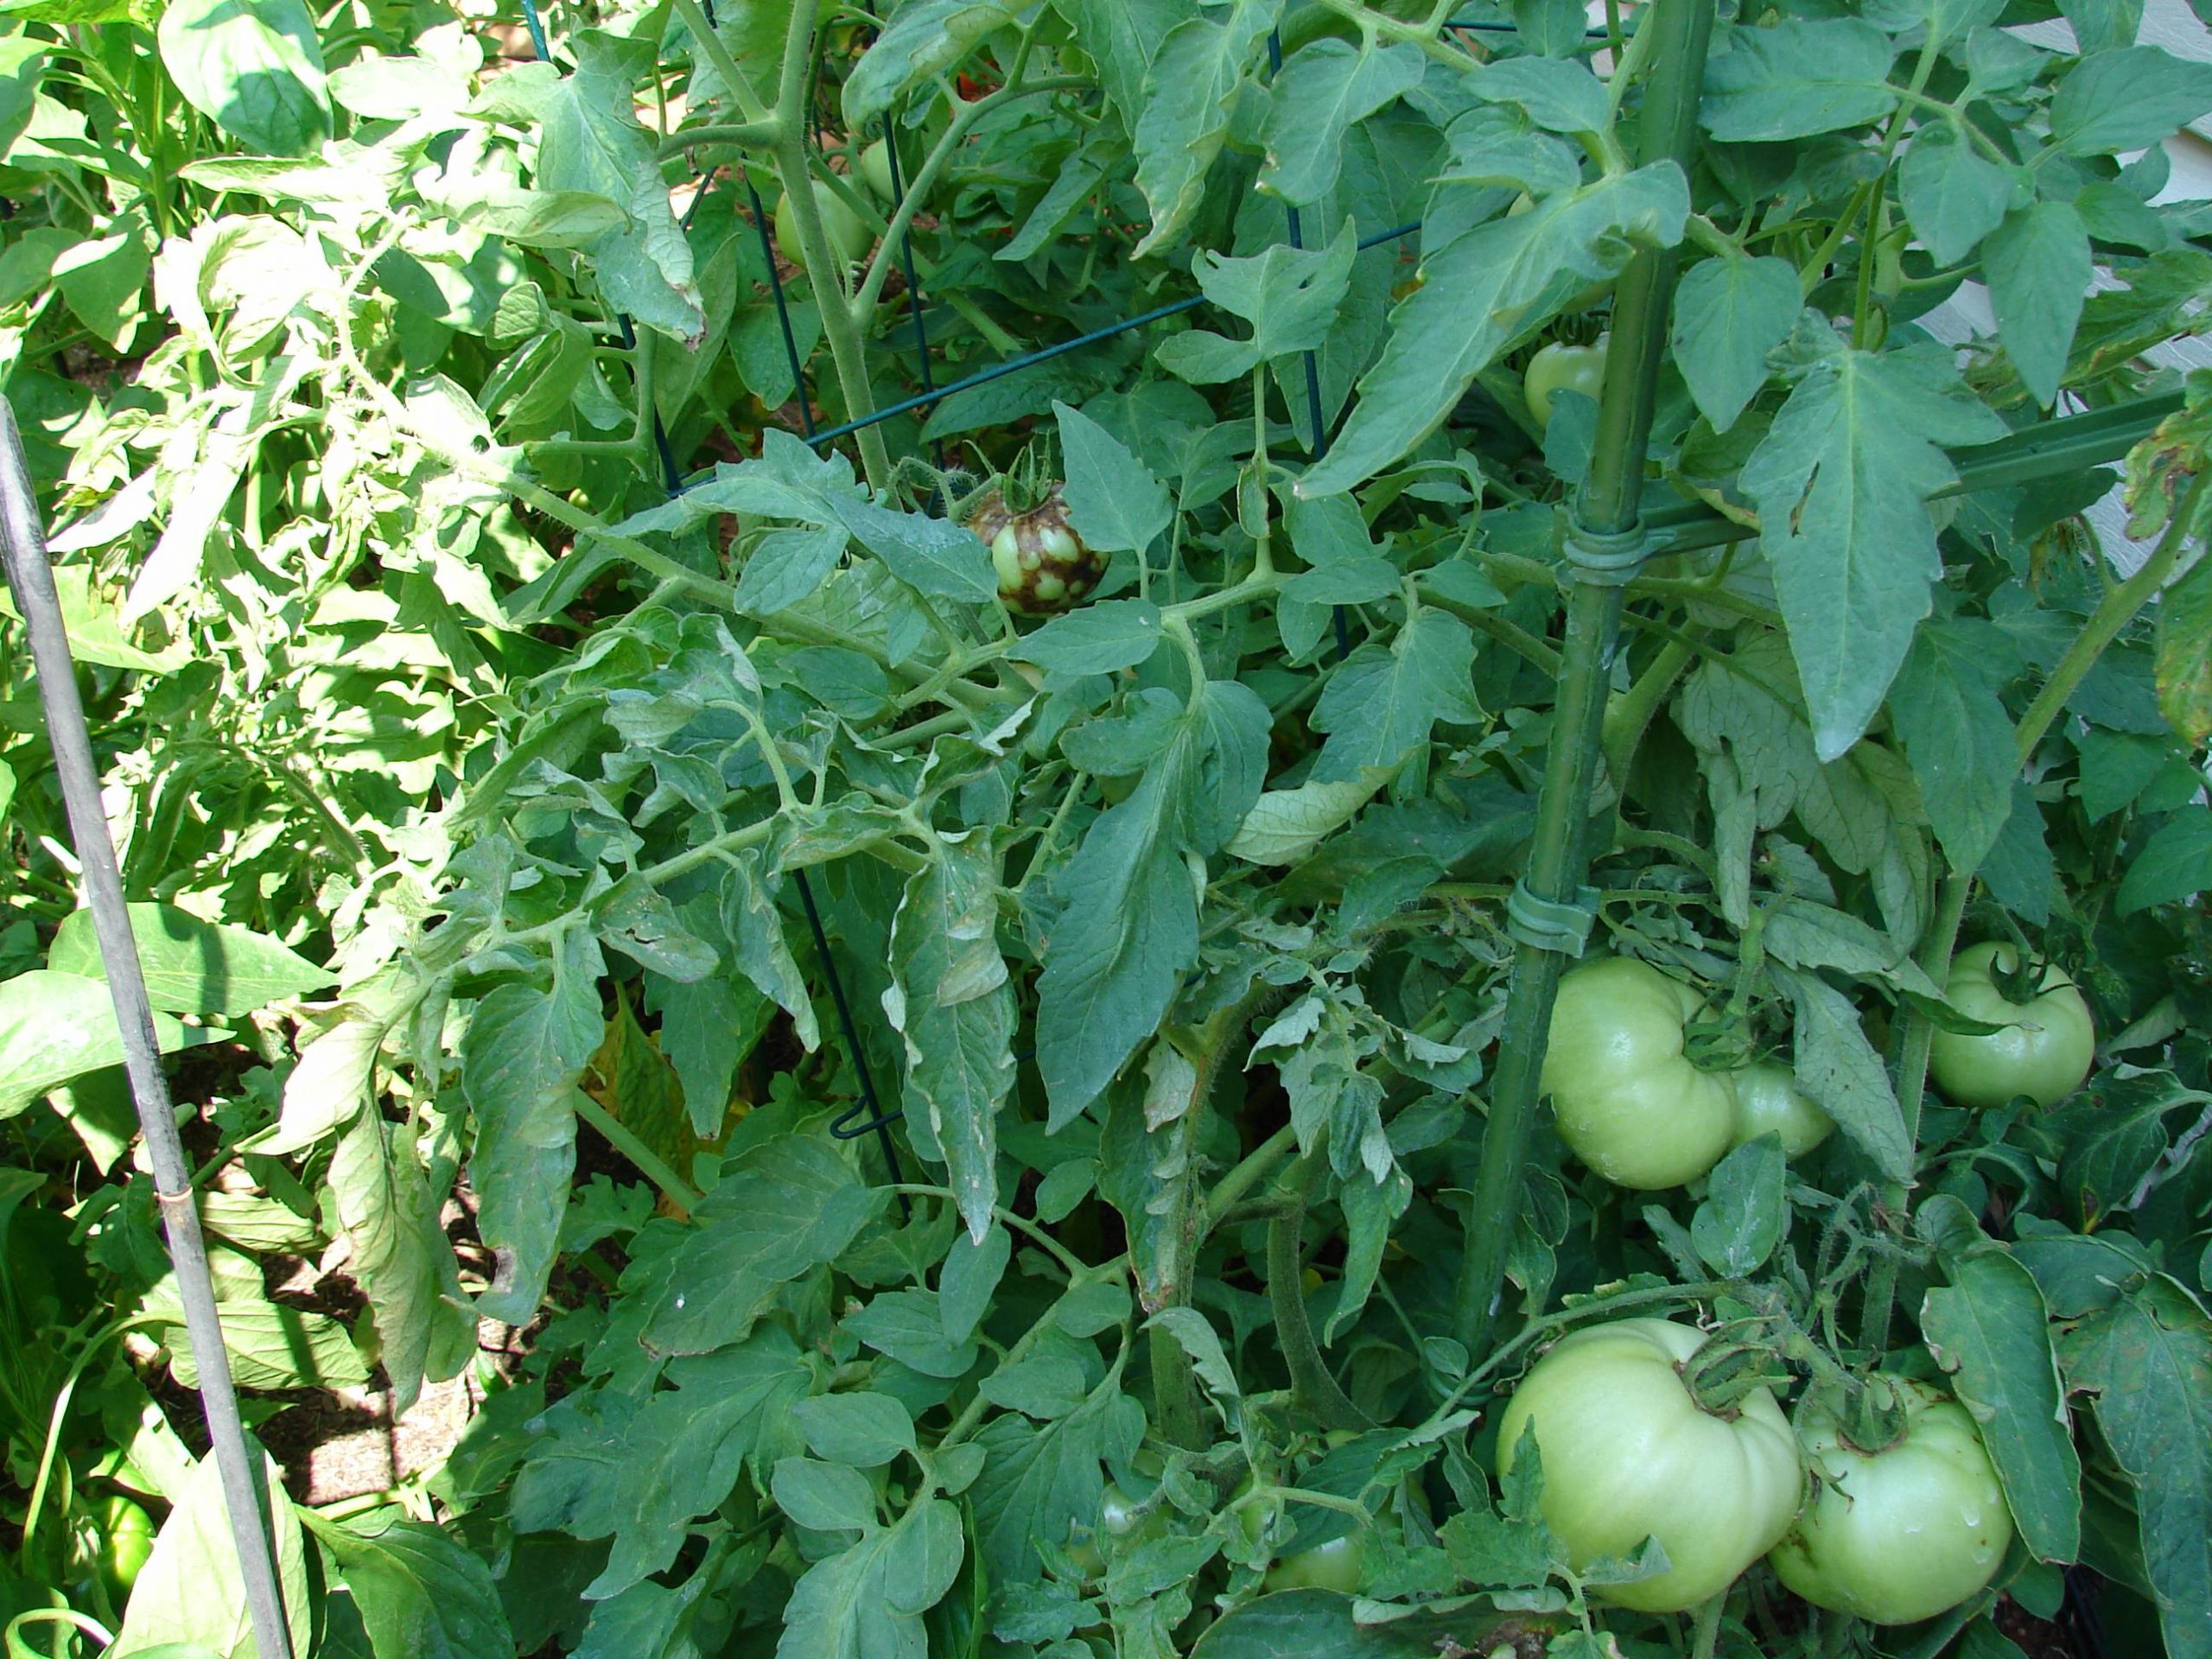 tomato spotted wilt virus 4 don't know source